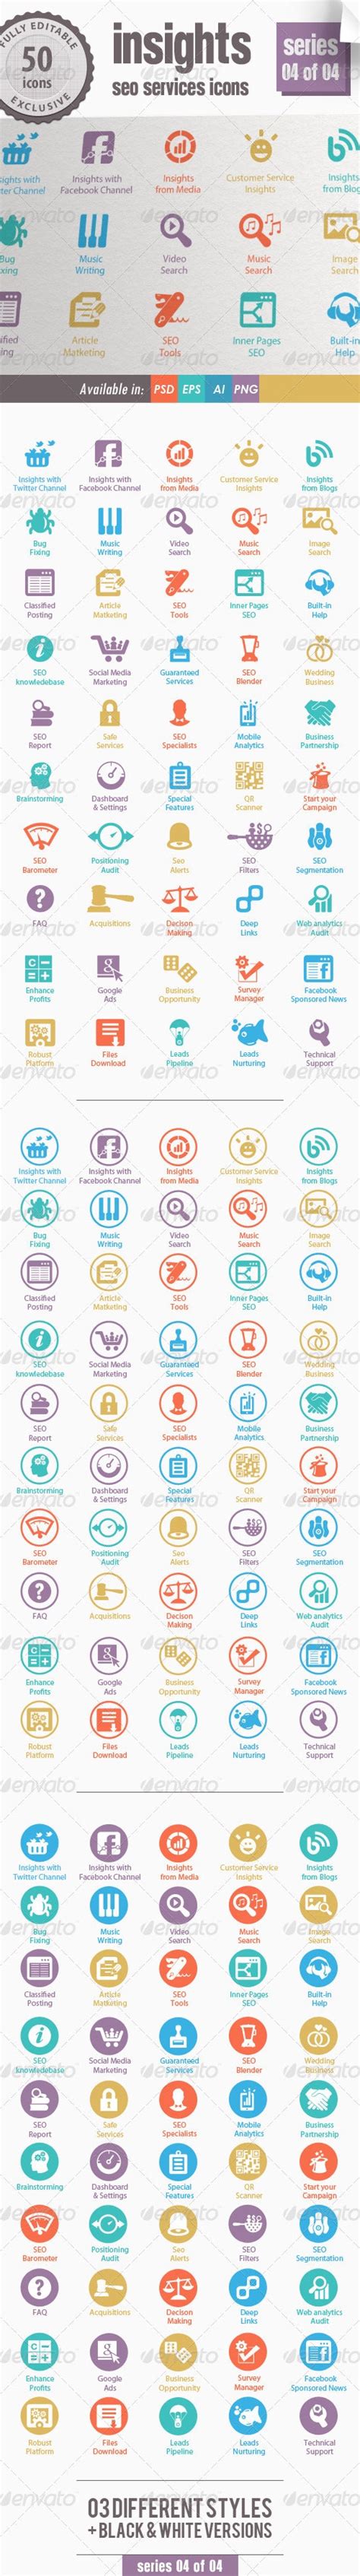 Insights Seo Services Icons Series 04 Of 04 By Kh2838 Graphicriver